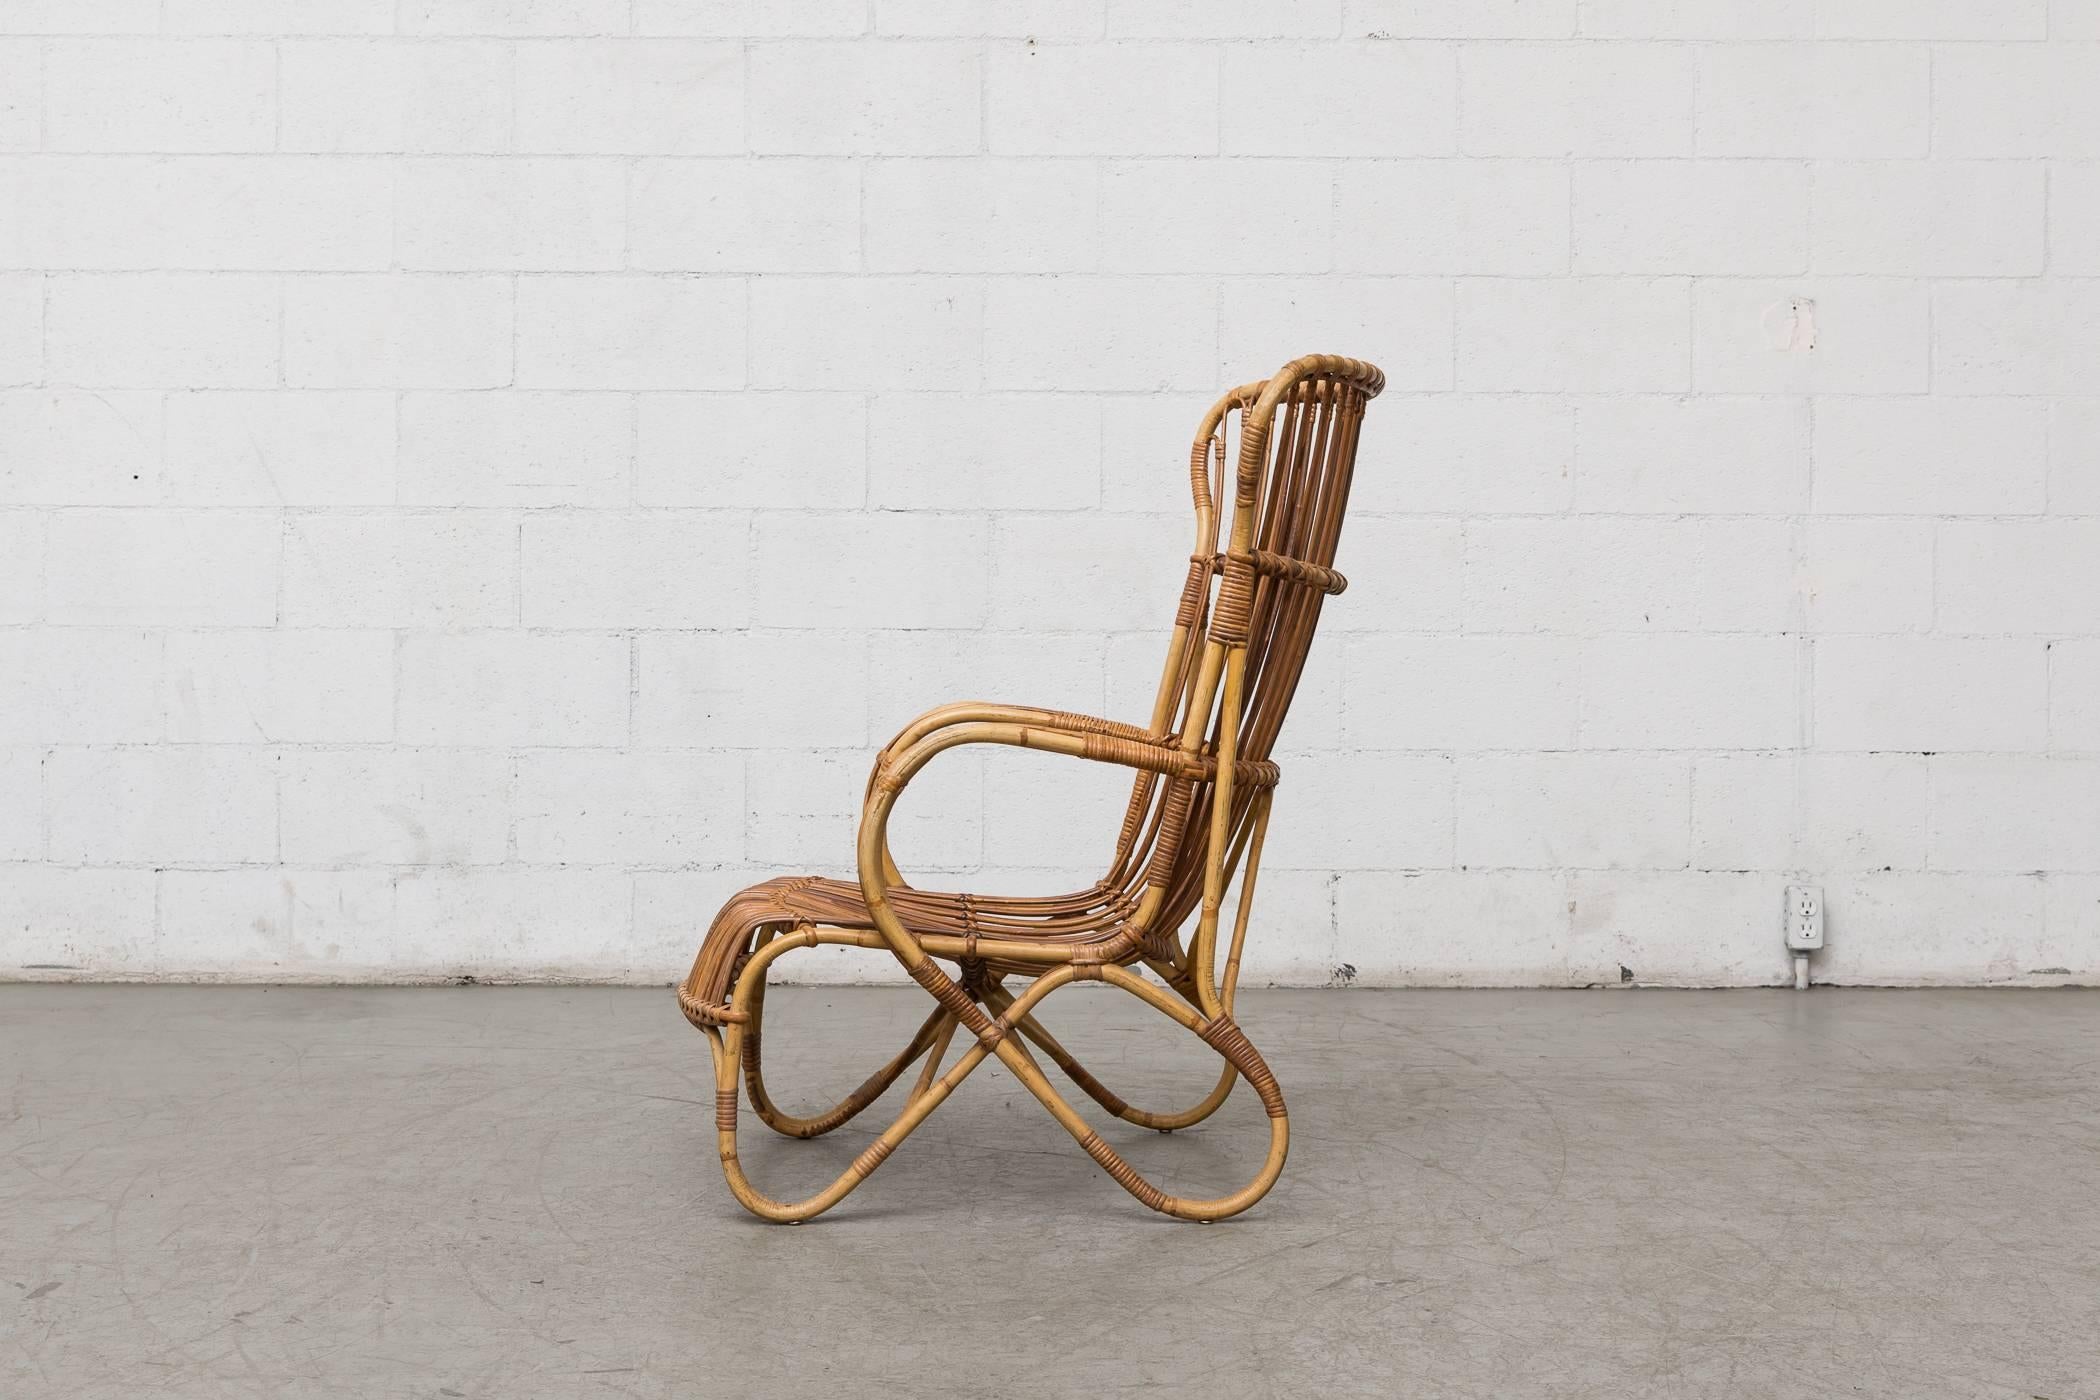 Midcentury high back bamboo lounge chairs with nice golden color with minimal bamboo loss and breakage. Wear consistent with its age and usage. Small repair (pictured).